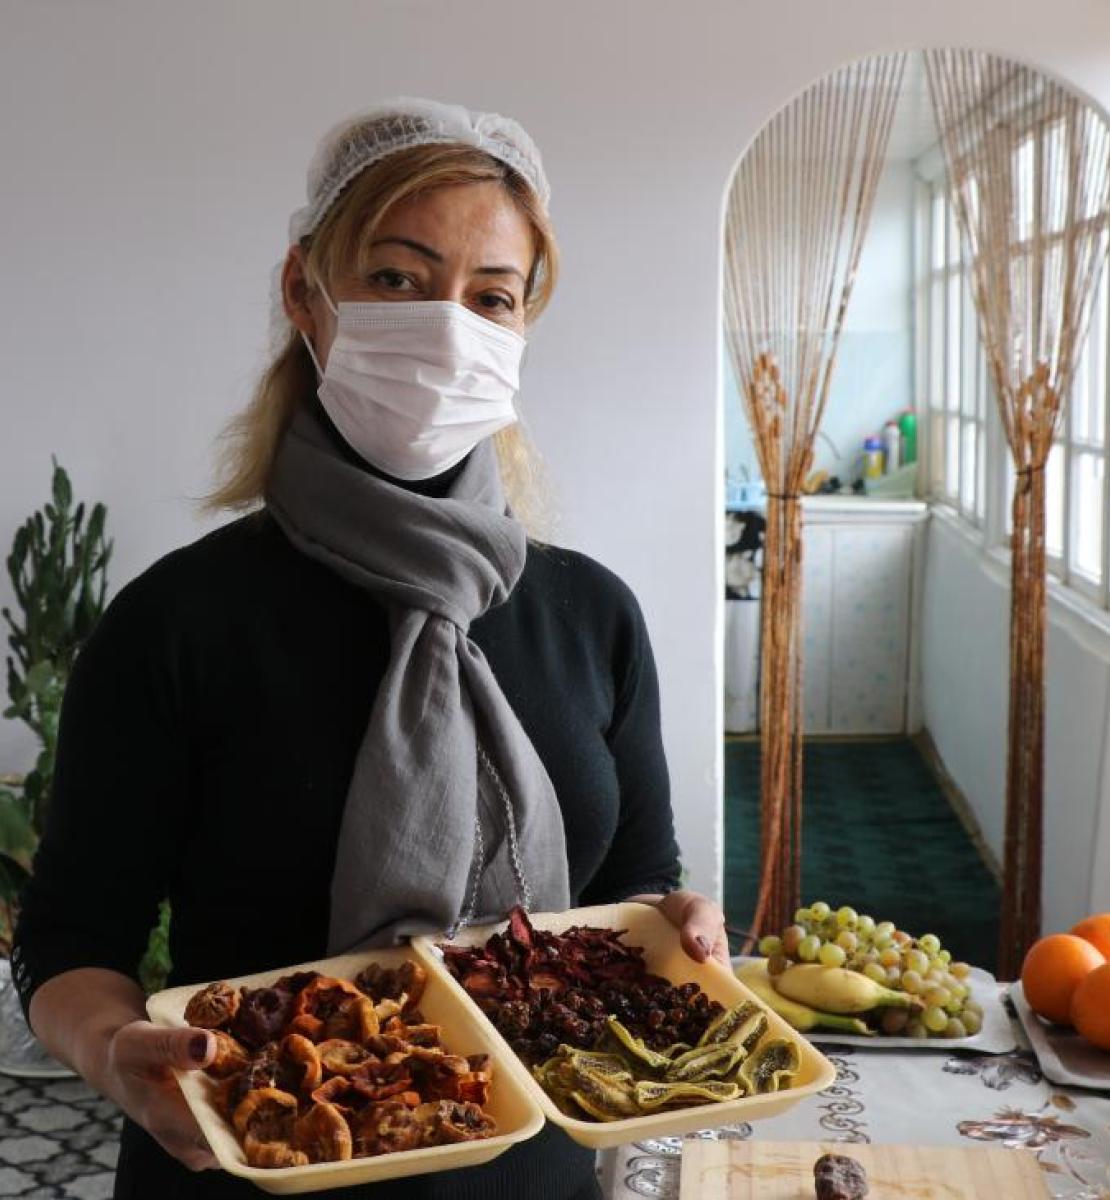 A woman wearing a white facemask showcases a takeaway food container full of dried fruits.